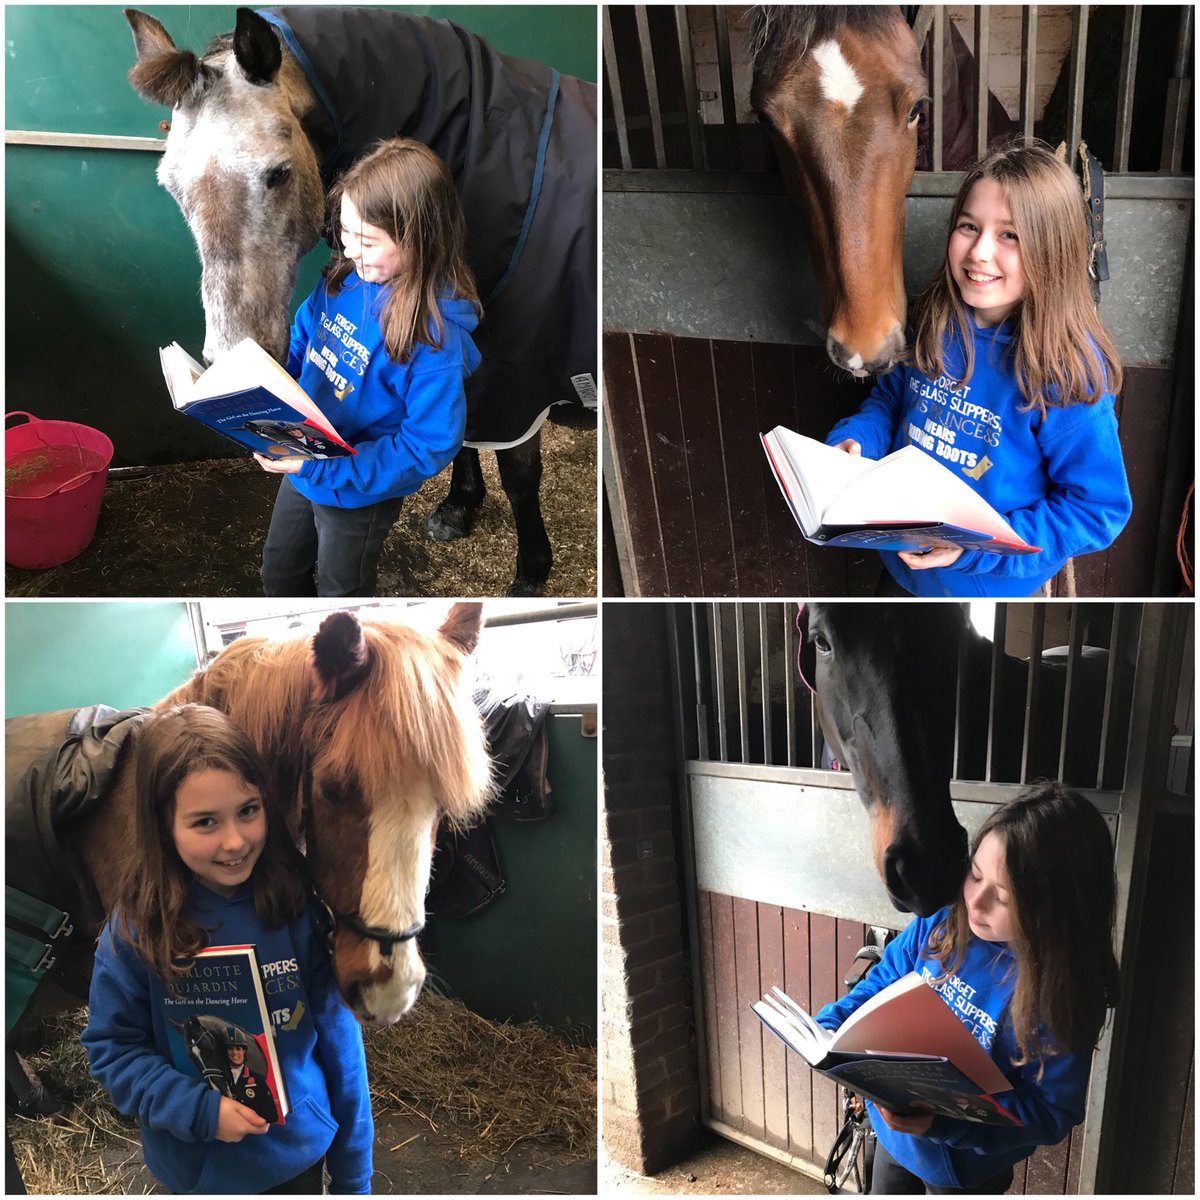 @CSJDujardin Lily aged 10 wanted me to share these photos with you. She enjoyed reading your book with her friends at the stables. #ParklandsRidingSchool #inspiration #Thegirlonthedancinghorse